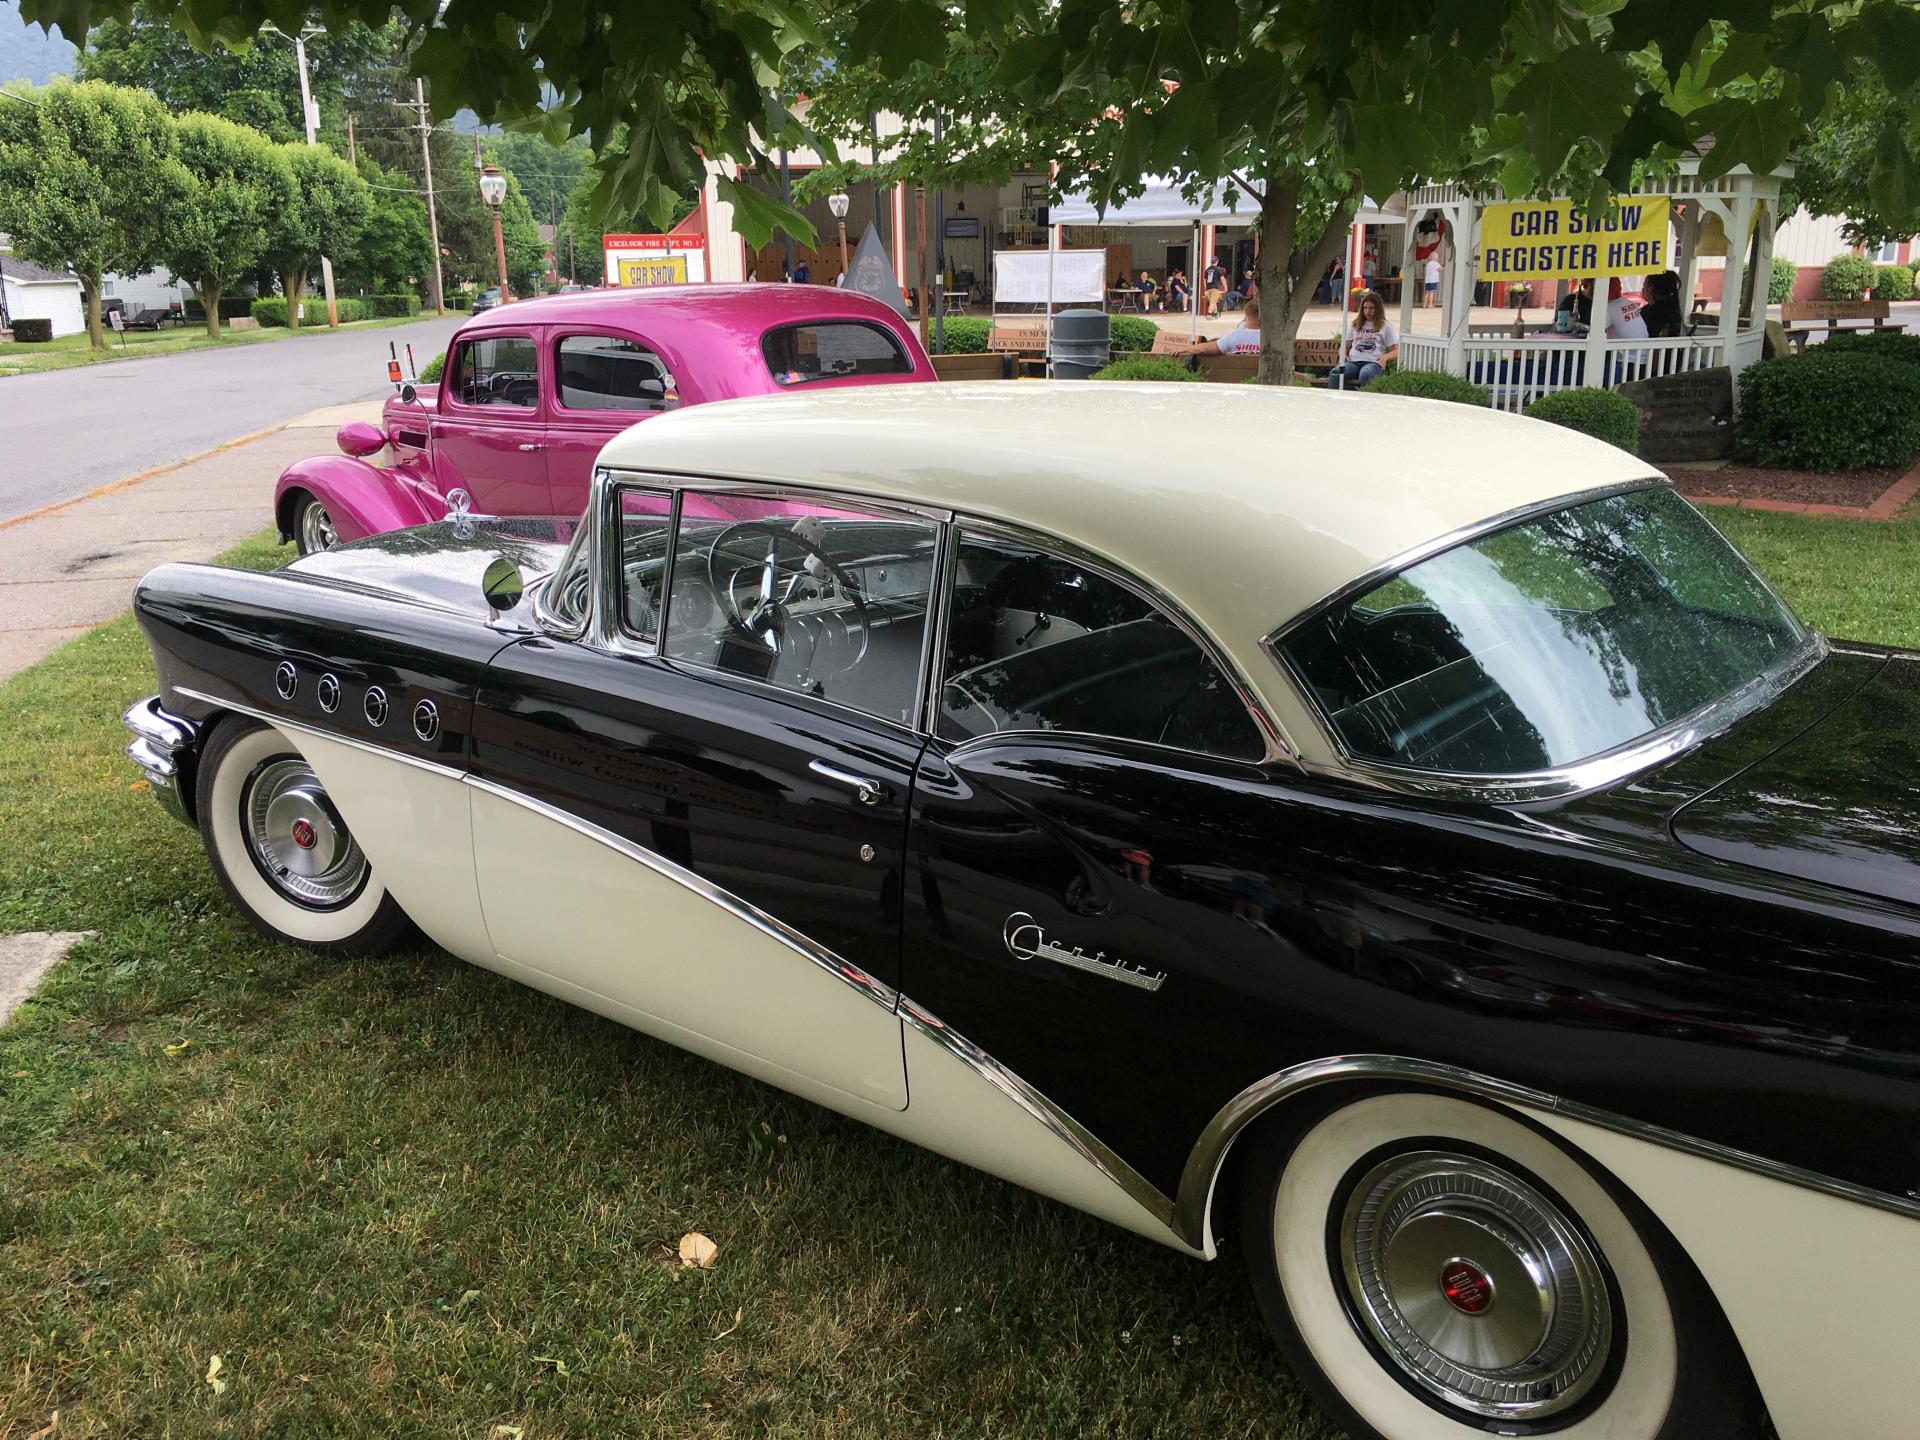 https://www.cooperclassiccars.com/imagetag/4301/2/l/Used-1955-Buick-Century-50s-60s-Muscle-American-Americana-Classic.jpg